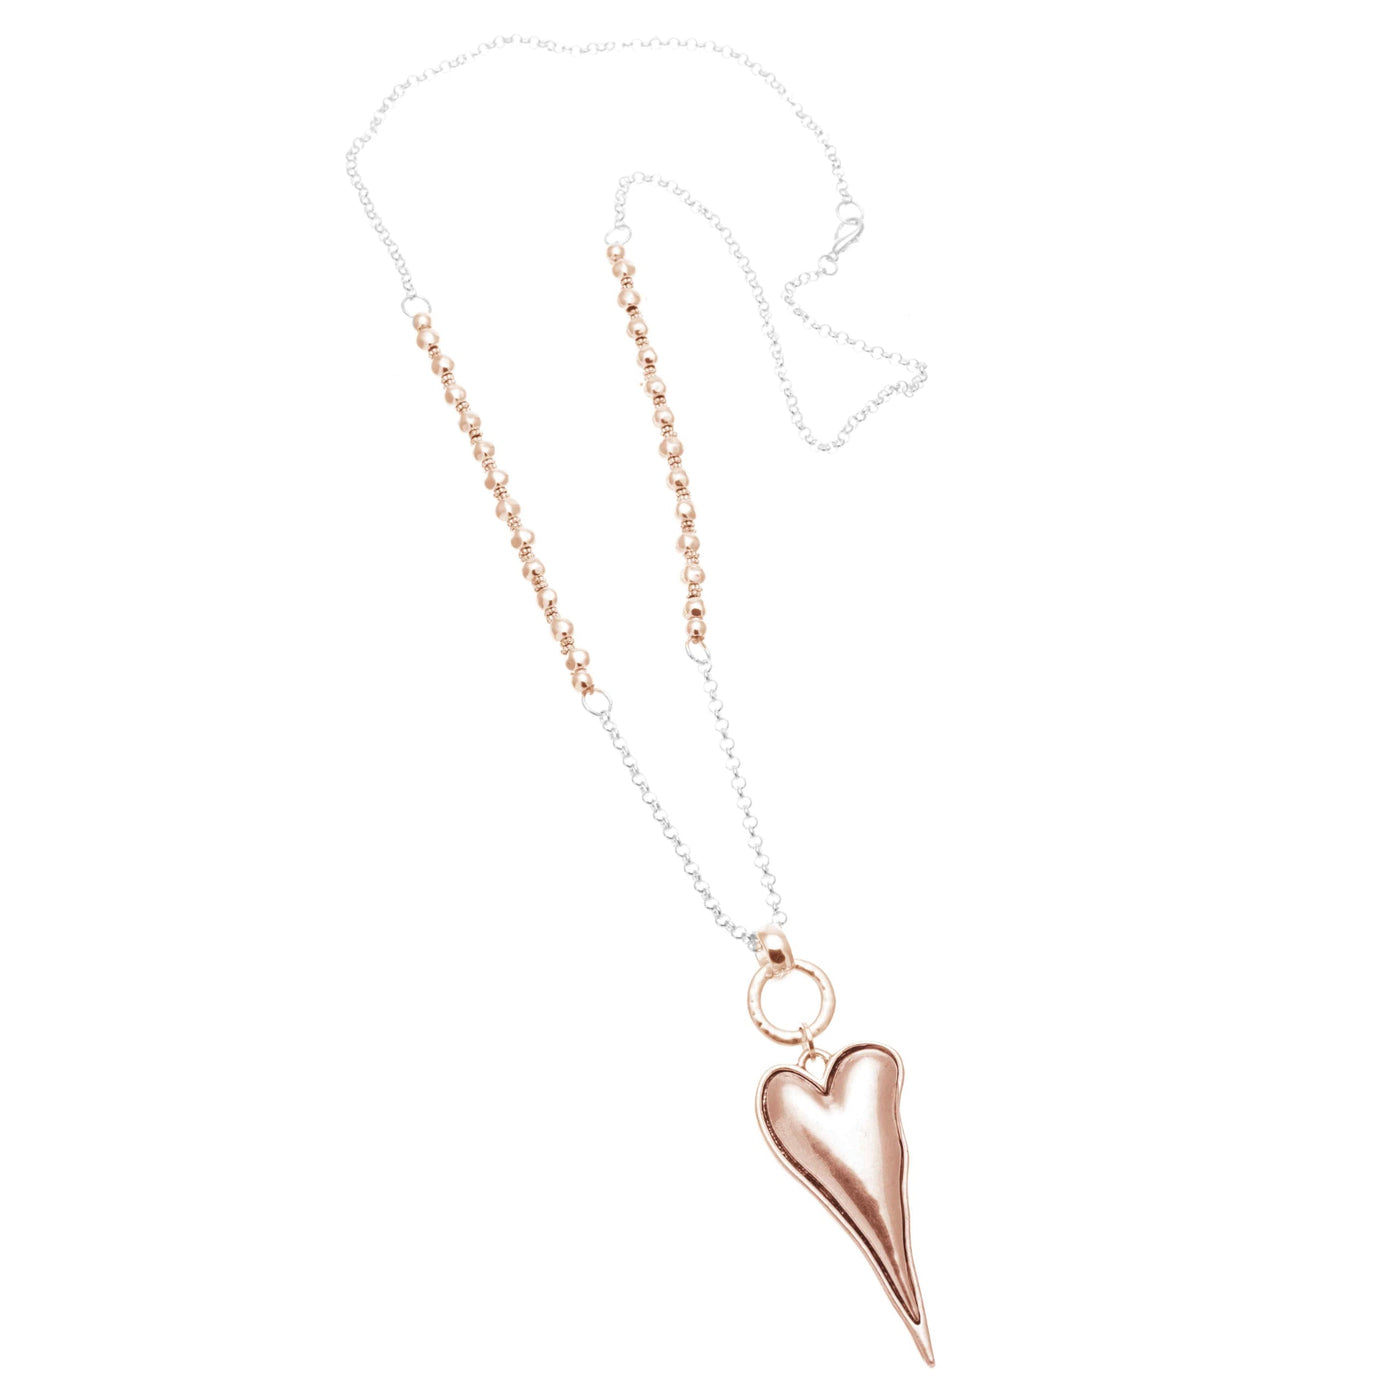 Merx - Fashion Long Chain Necklace with Heart Pendant in Rose Gold